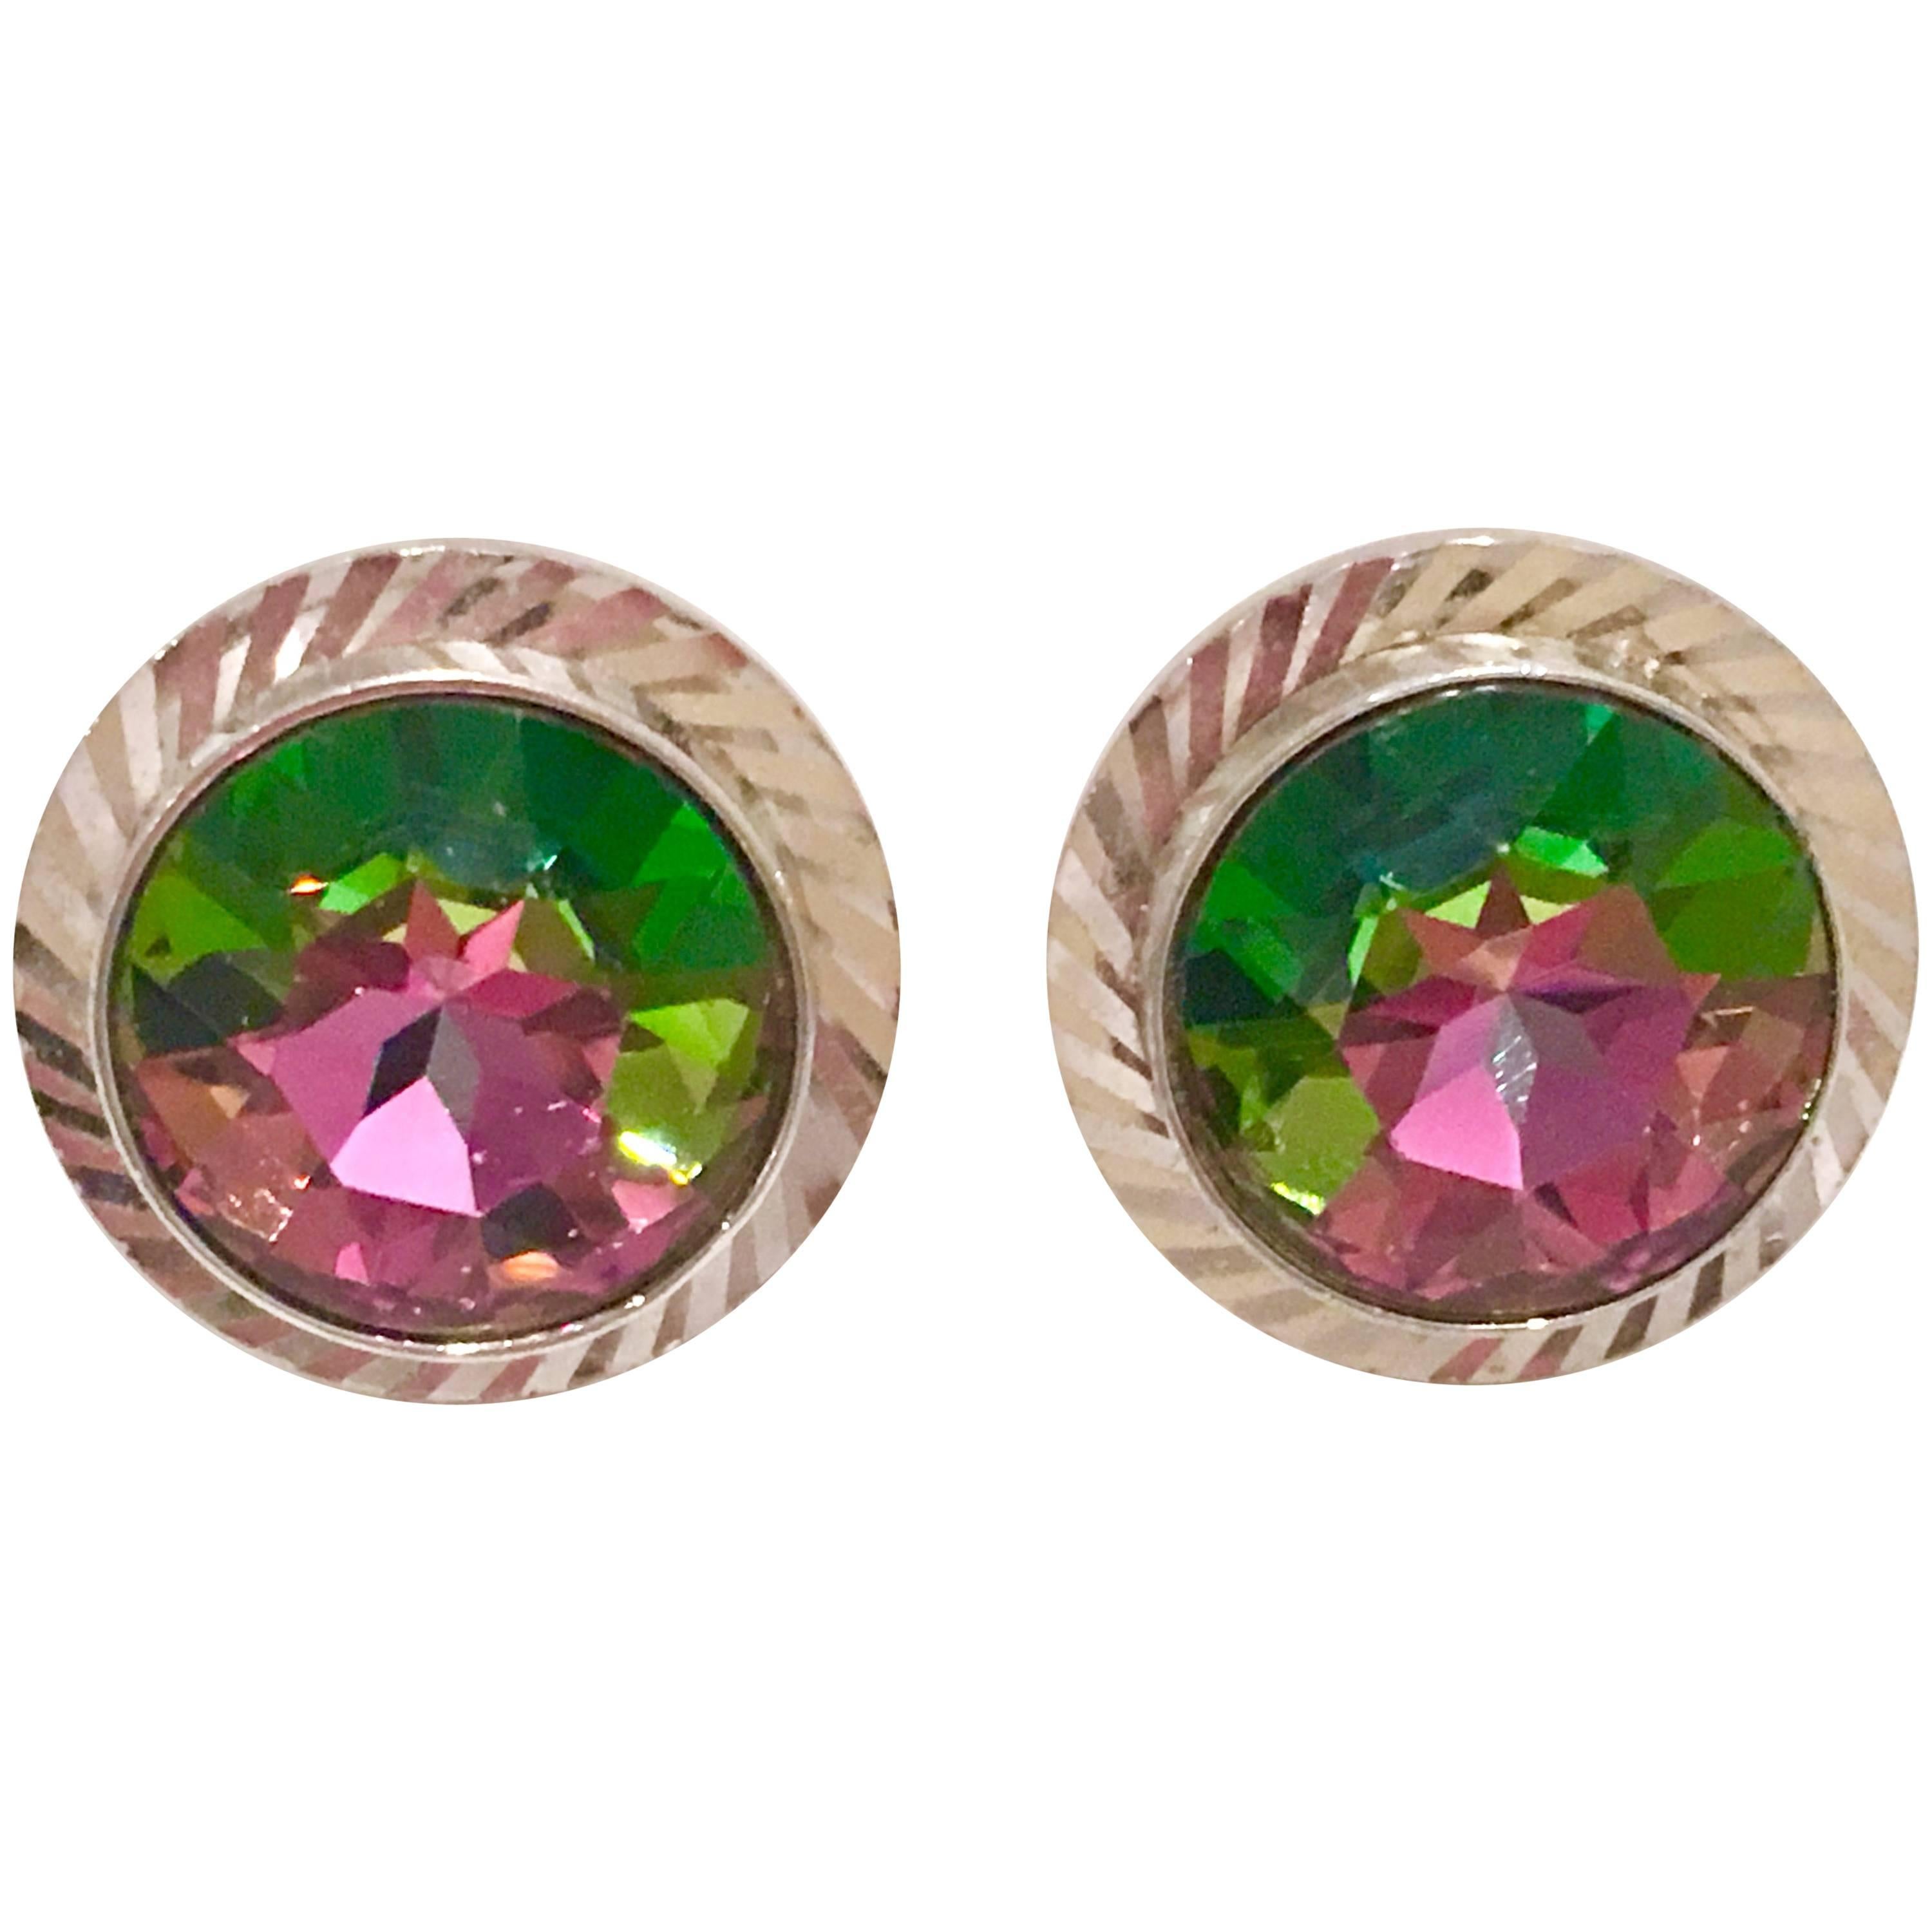 Mid-Century Pair Of Silver & Crystal "Watermelon" Cuff Links By, Dante im Angebot